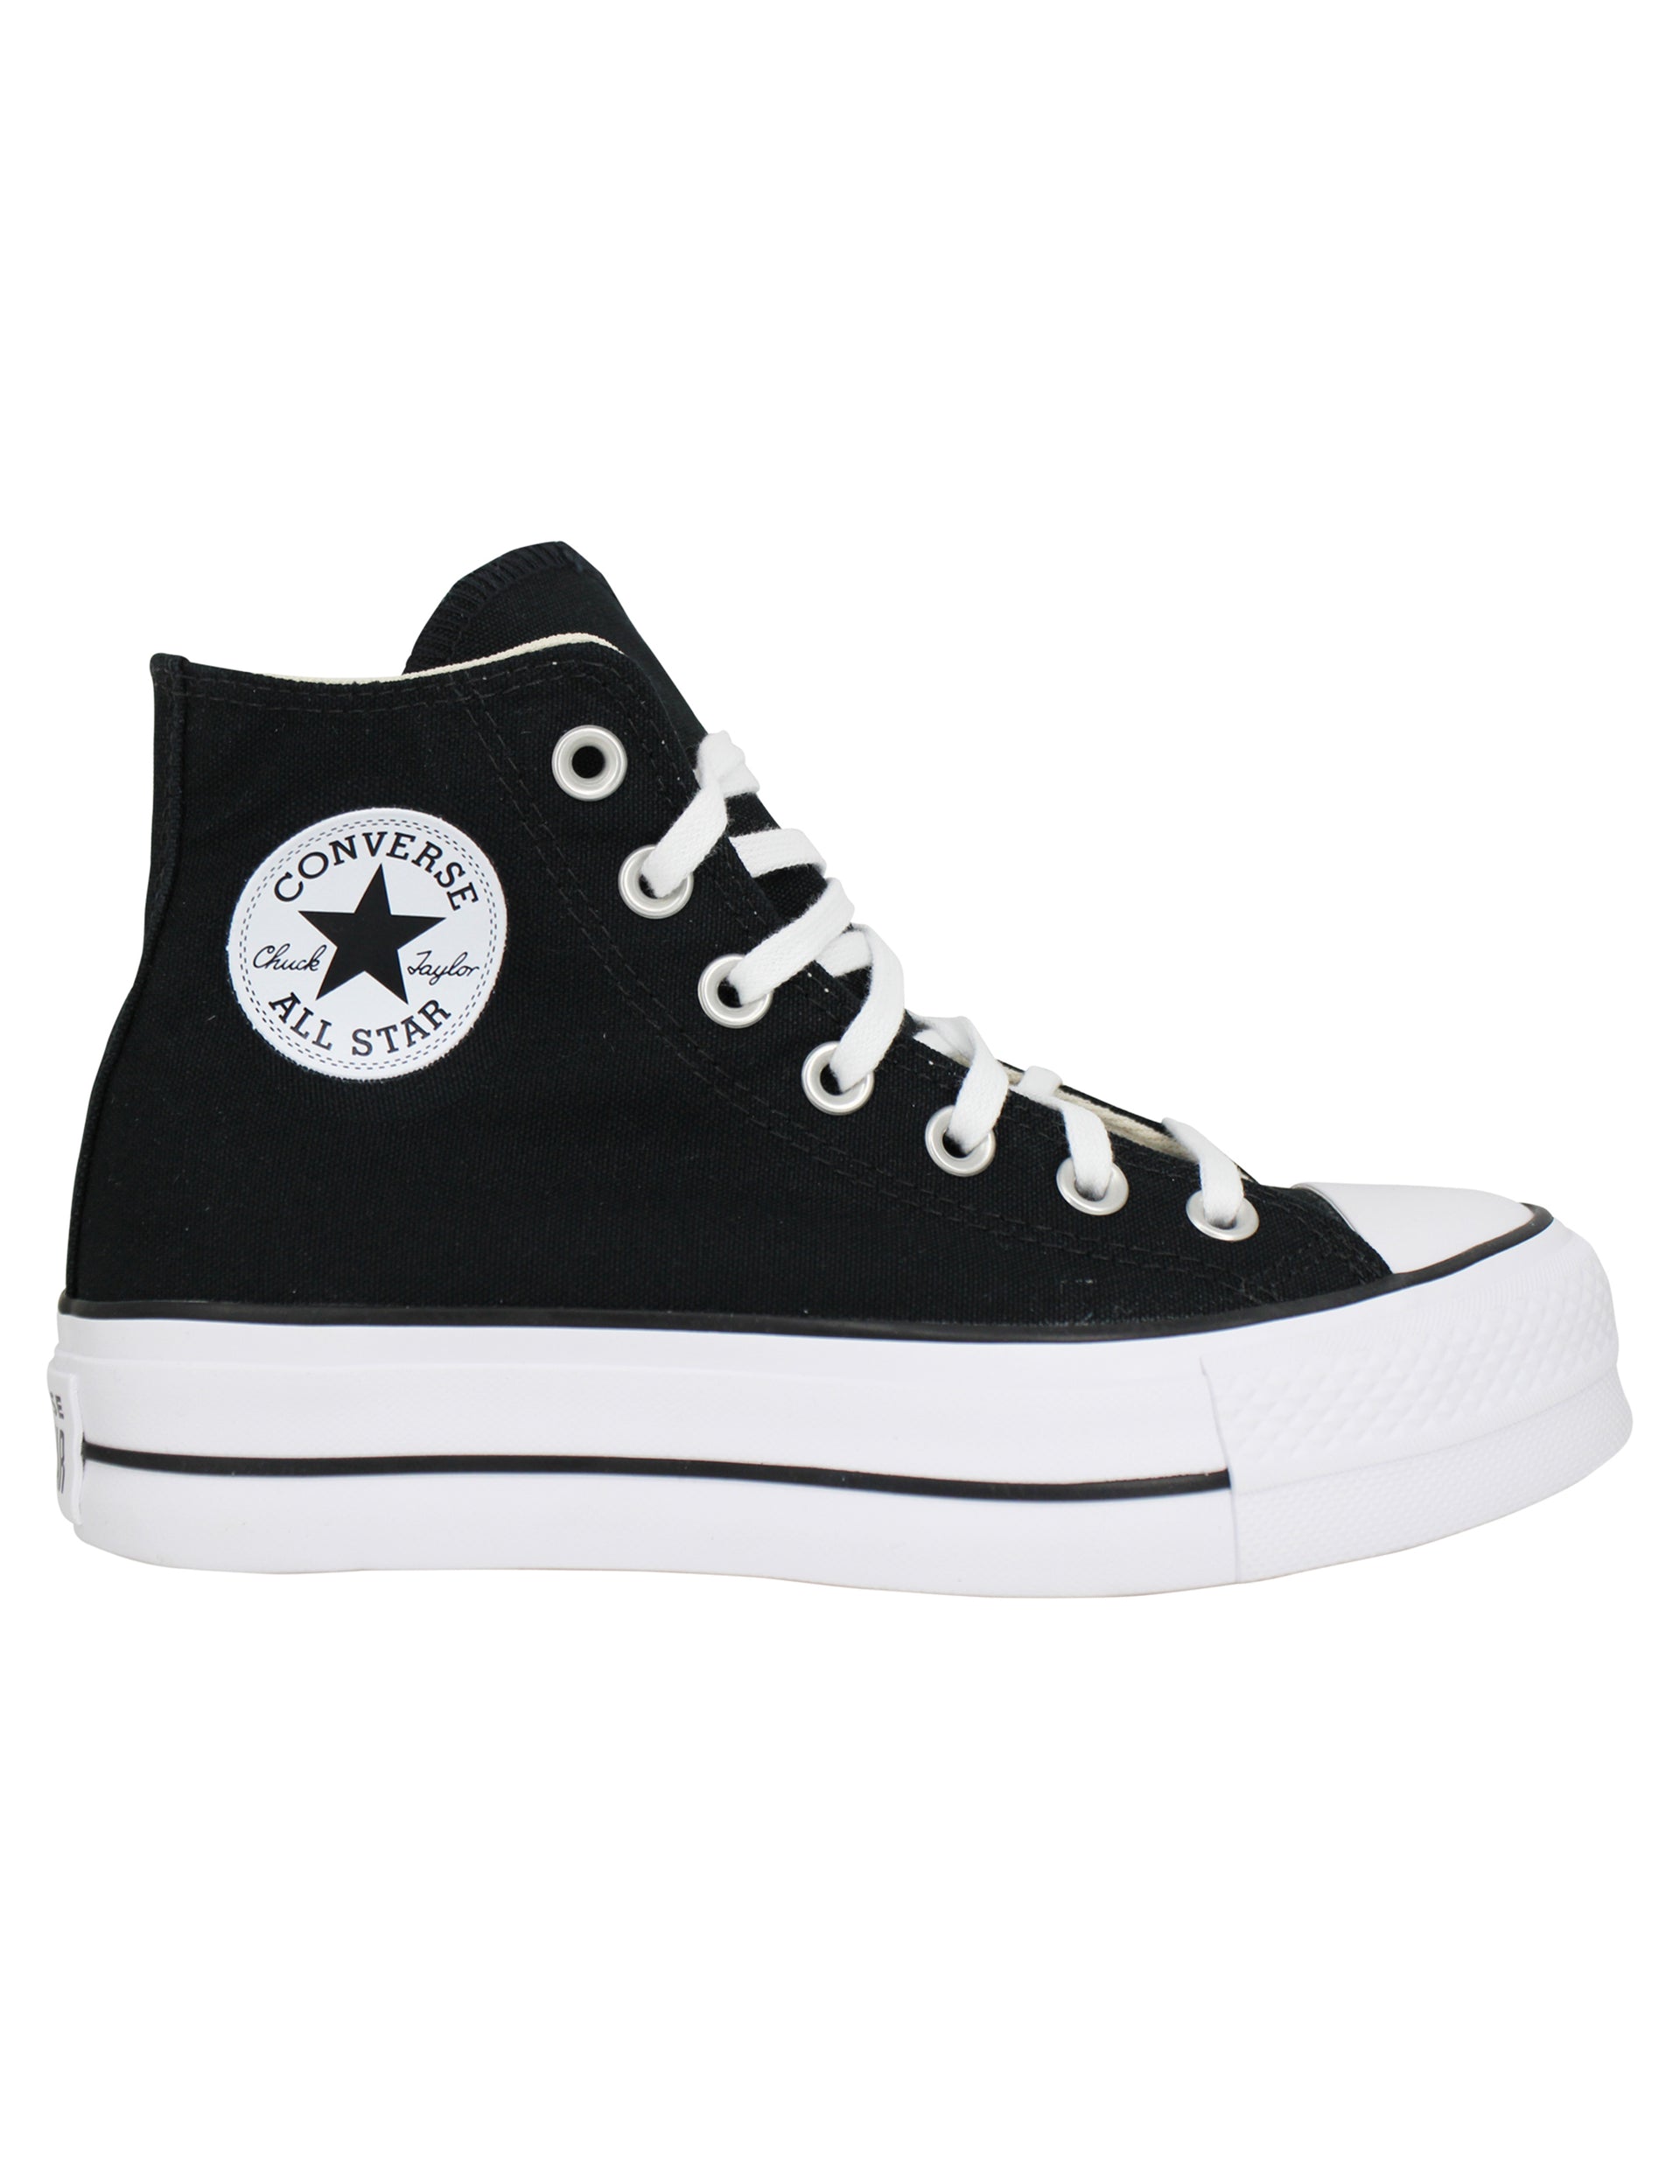 Chuck Taylor women's sneakers, black canvas ankle boot with wedge bottom